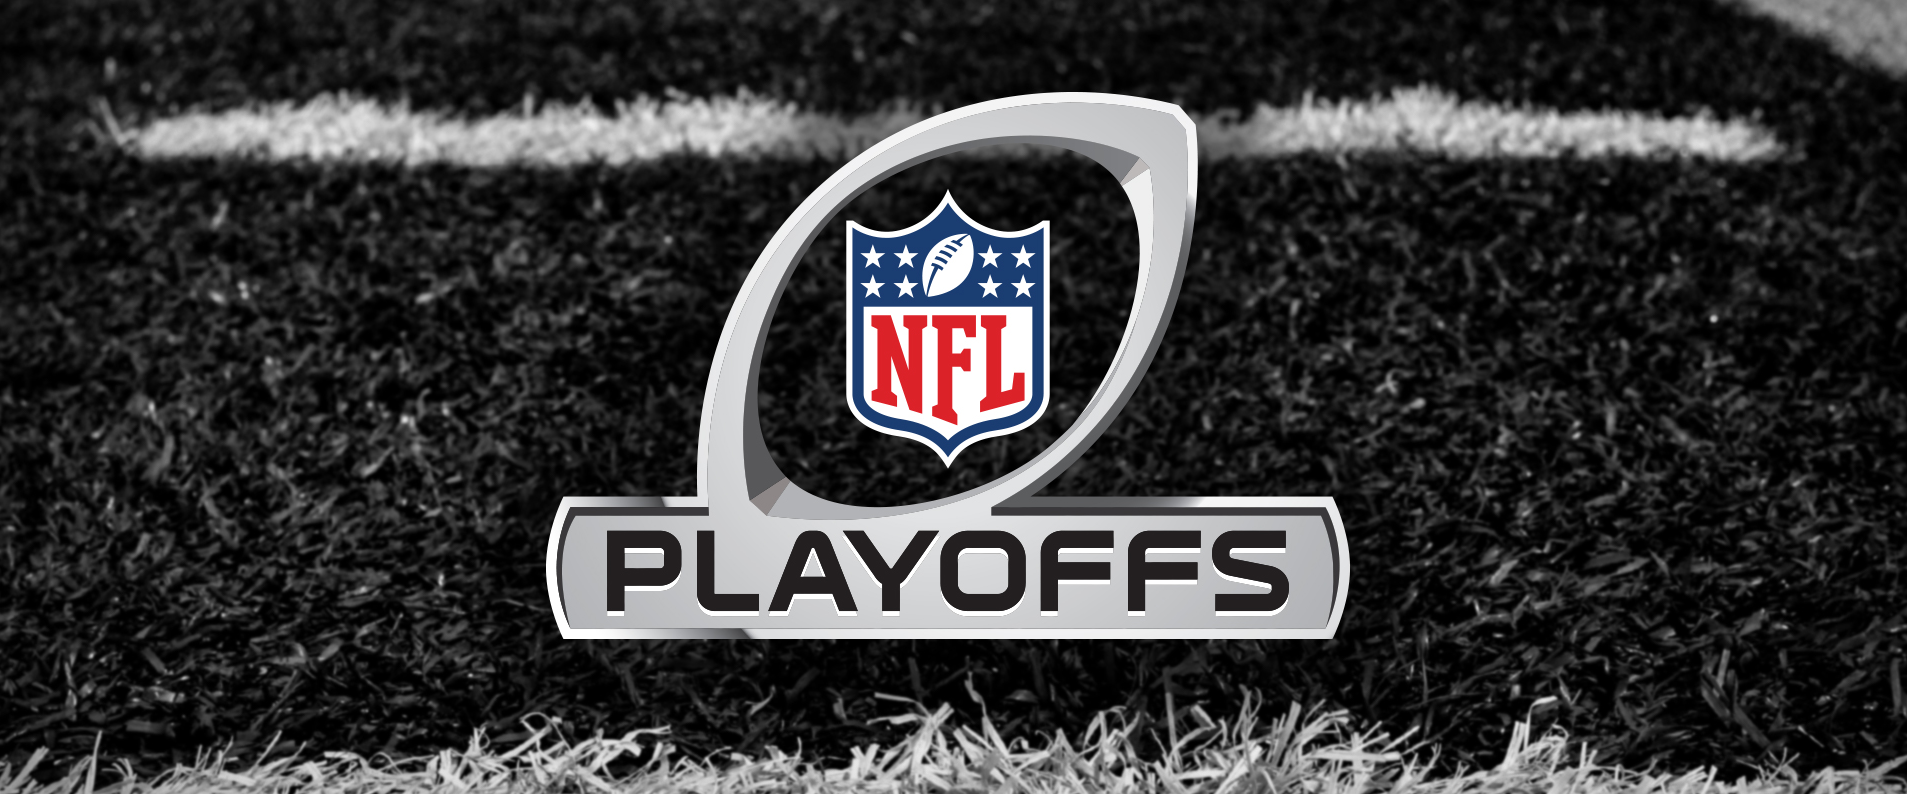 Ranking the NFL Playoff Teams #1-14